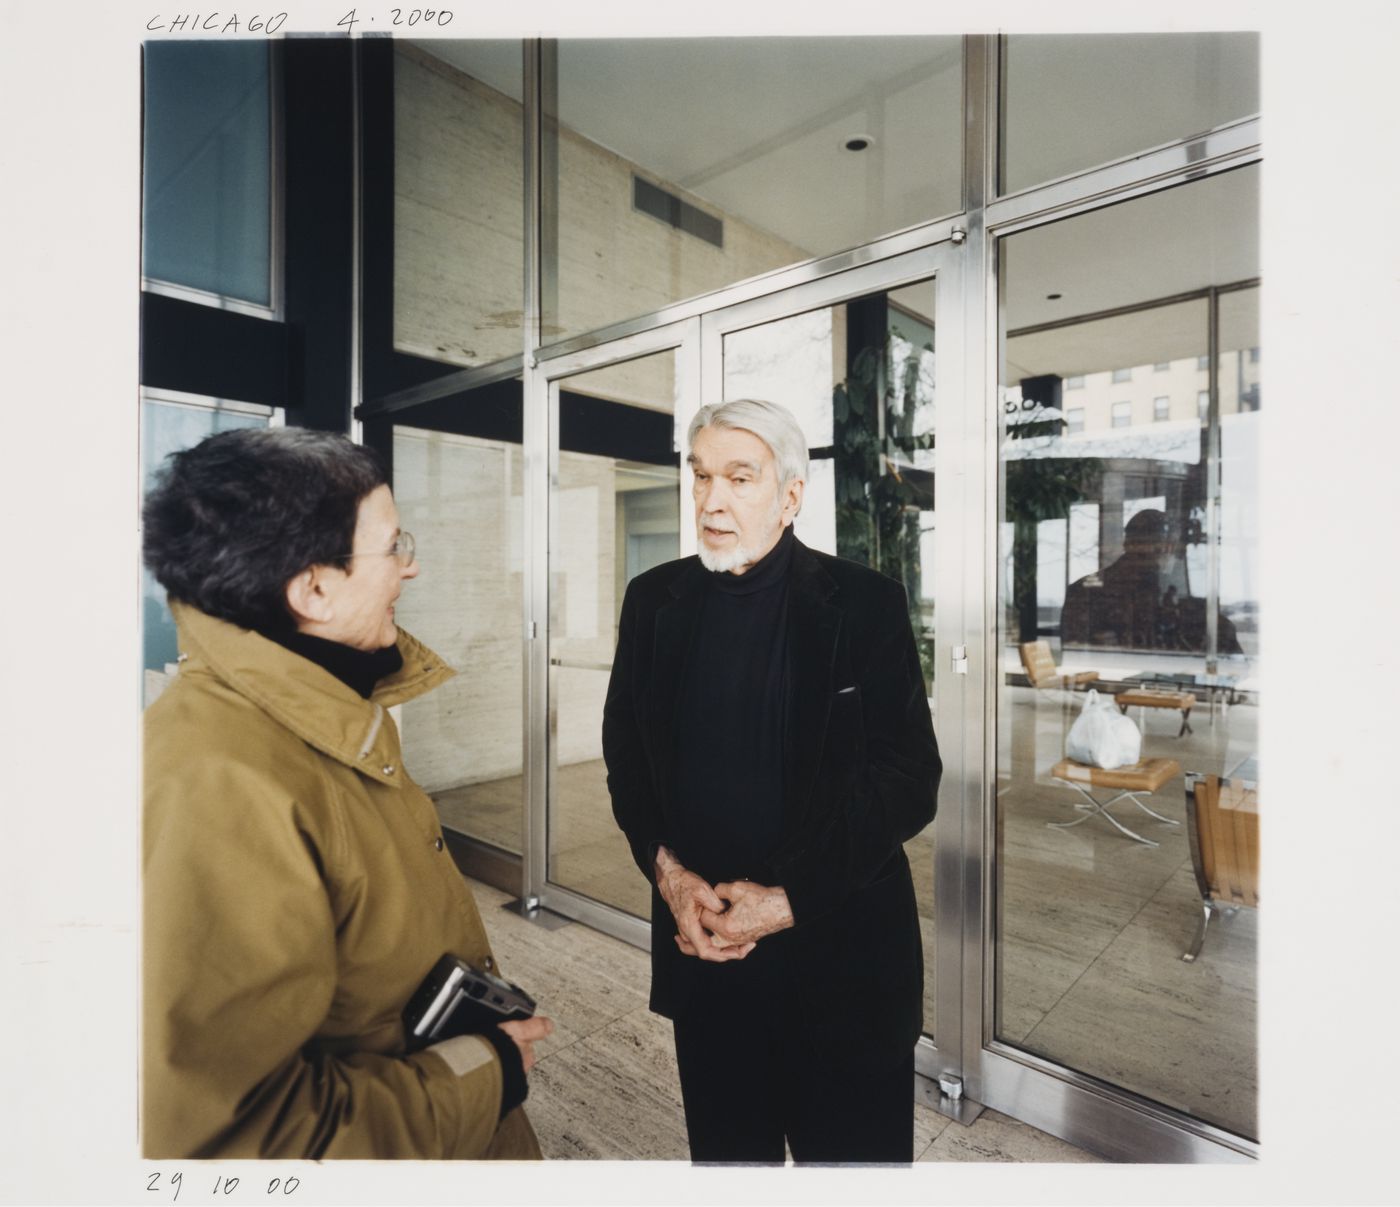 Exterior view of 880 Lake Shore Drive Apartments showing Phyllis Lambert and the architect George Danforth standing in front of the lobby furnished with barcelona chairs, Chicago, Illinois